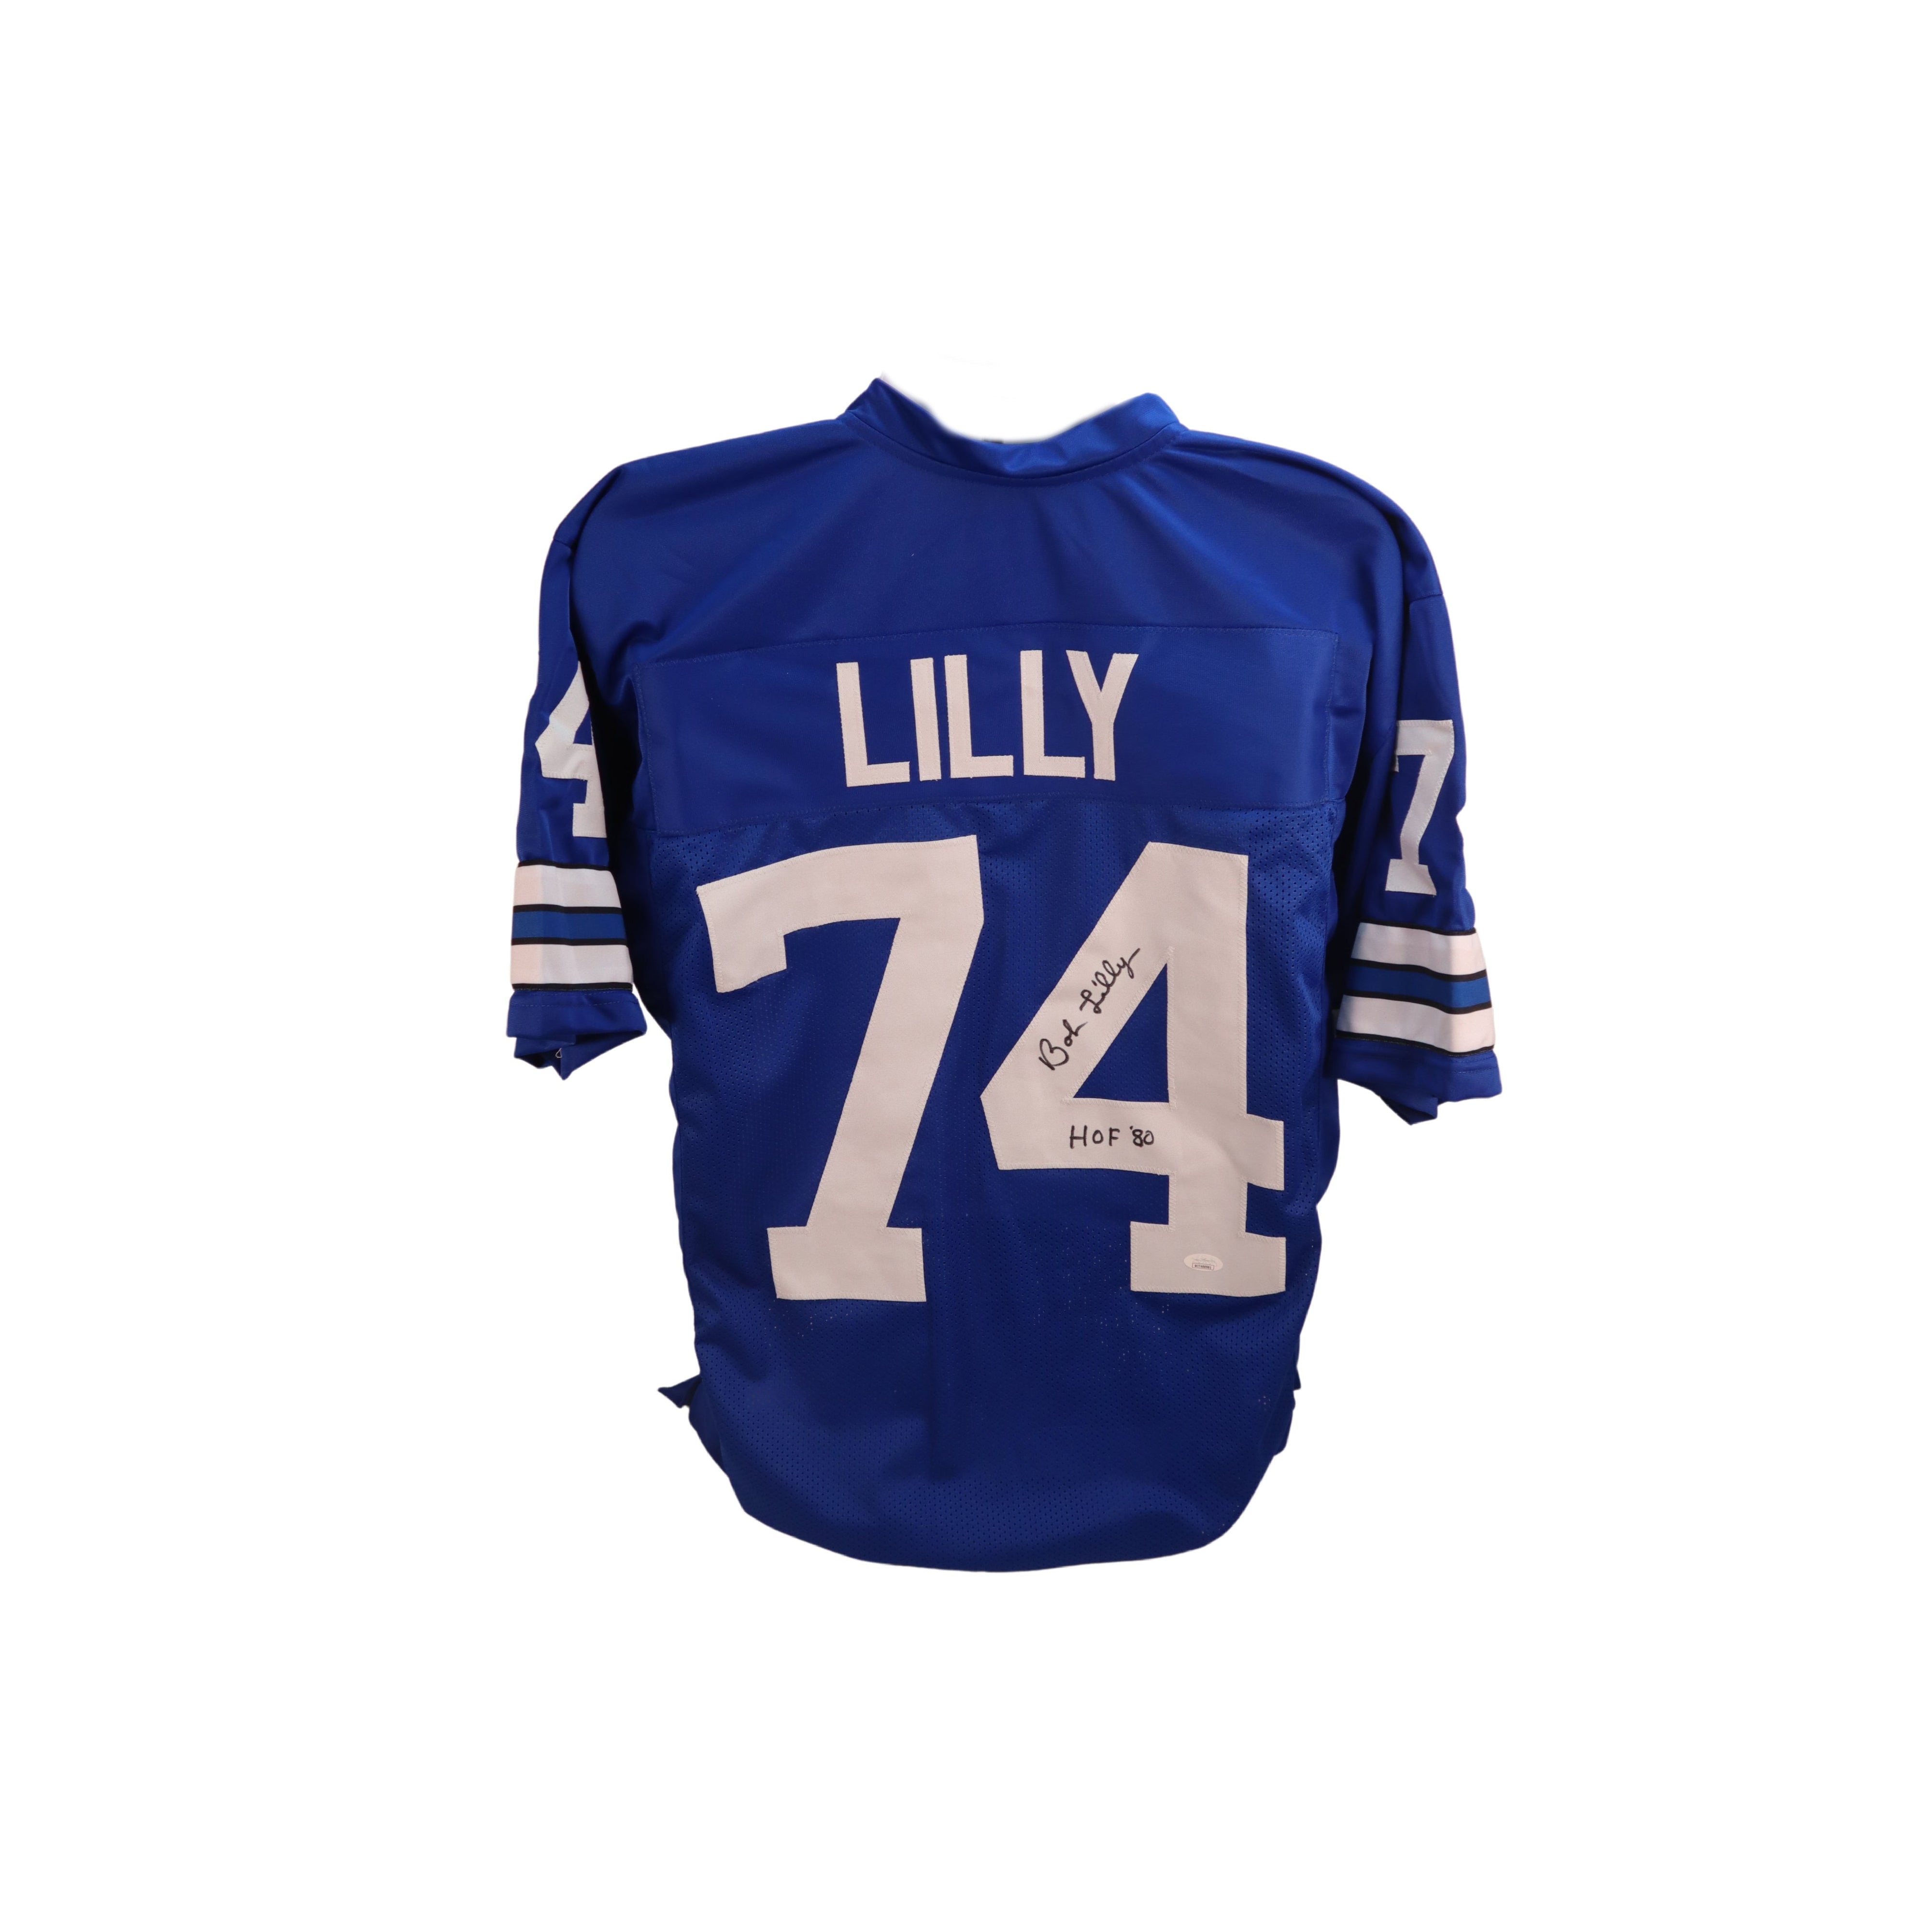 BOB LILLY AUTOGRAPHED HAND SIGNED CUSTOM DALLAS COWBOYS JERSEY